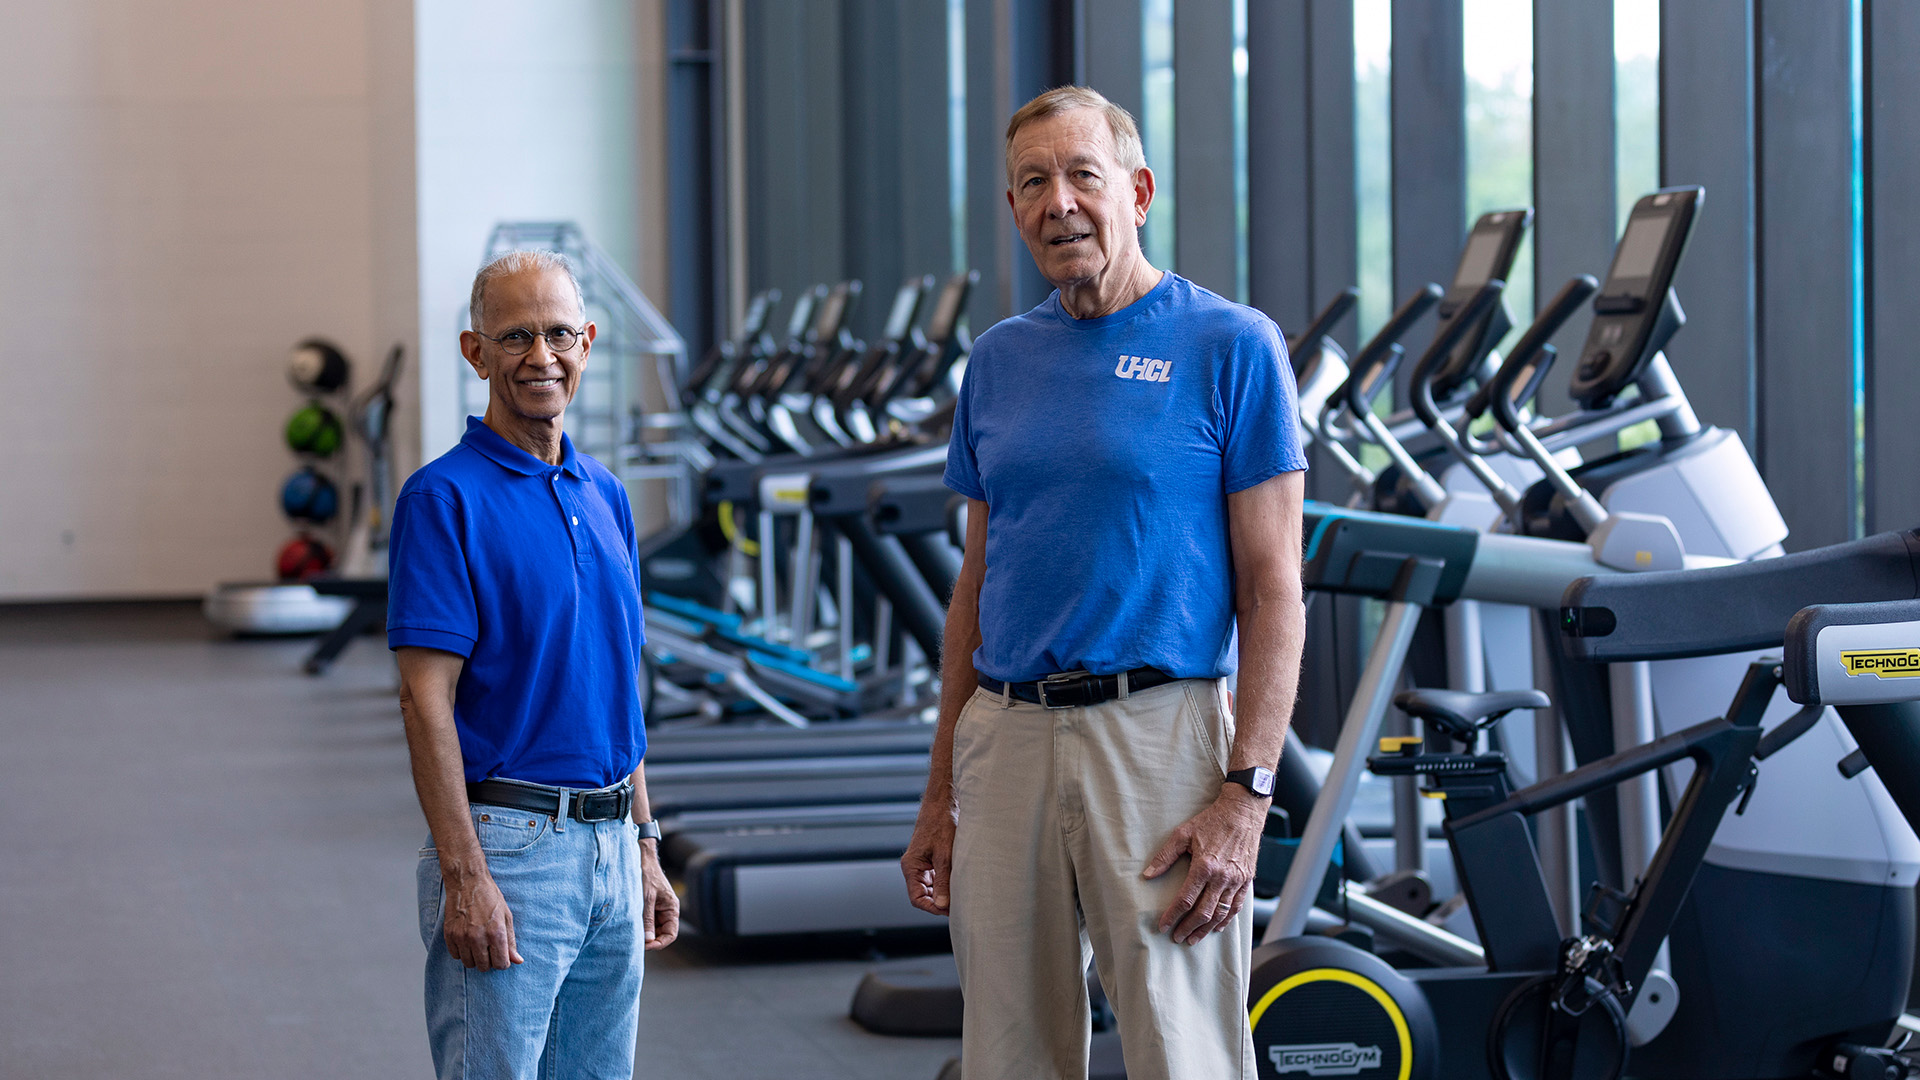 Two men in blue shirts standing among exercise equipment